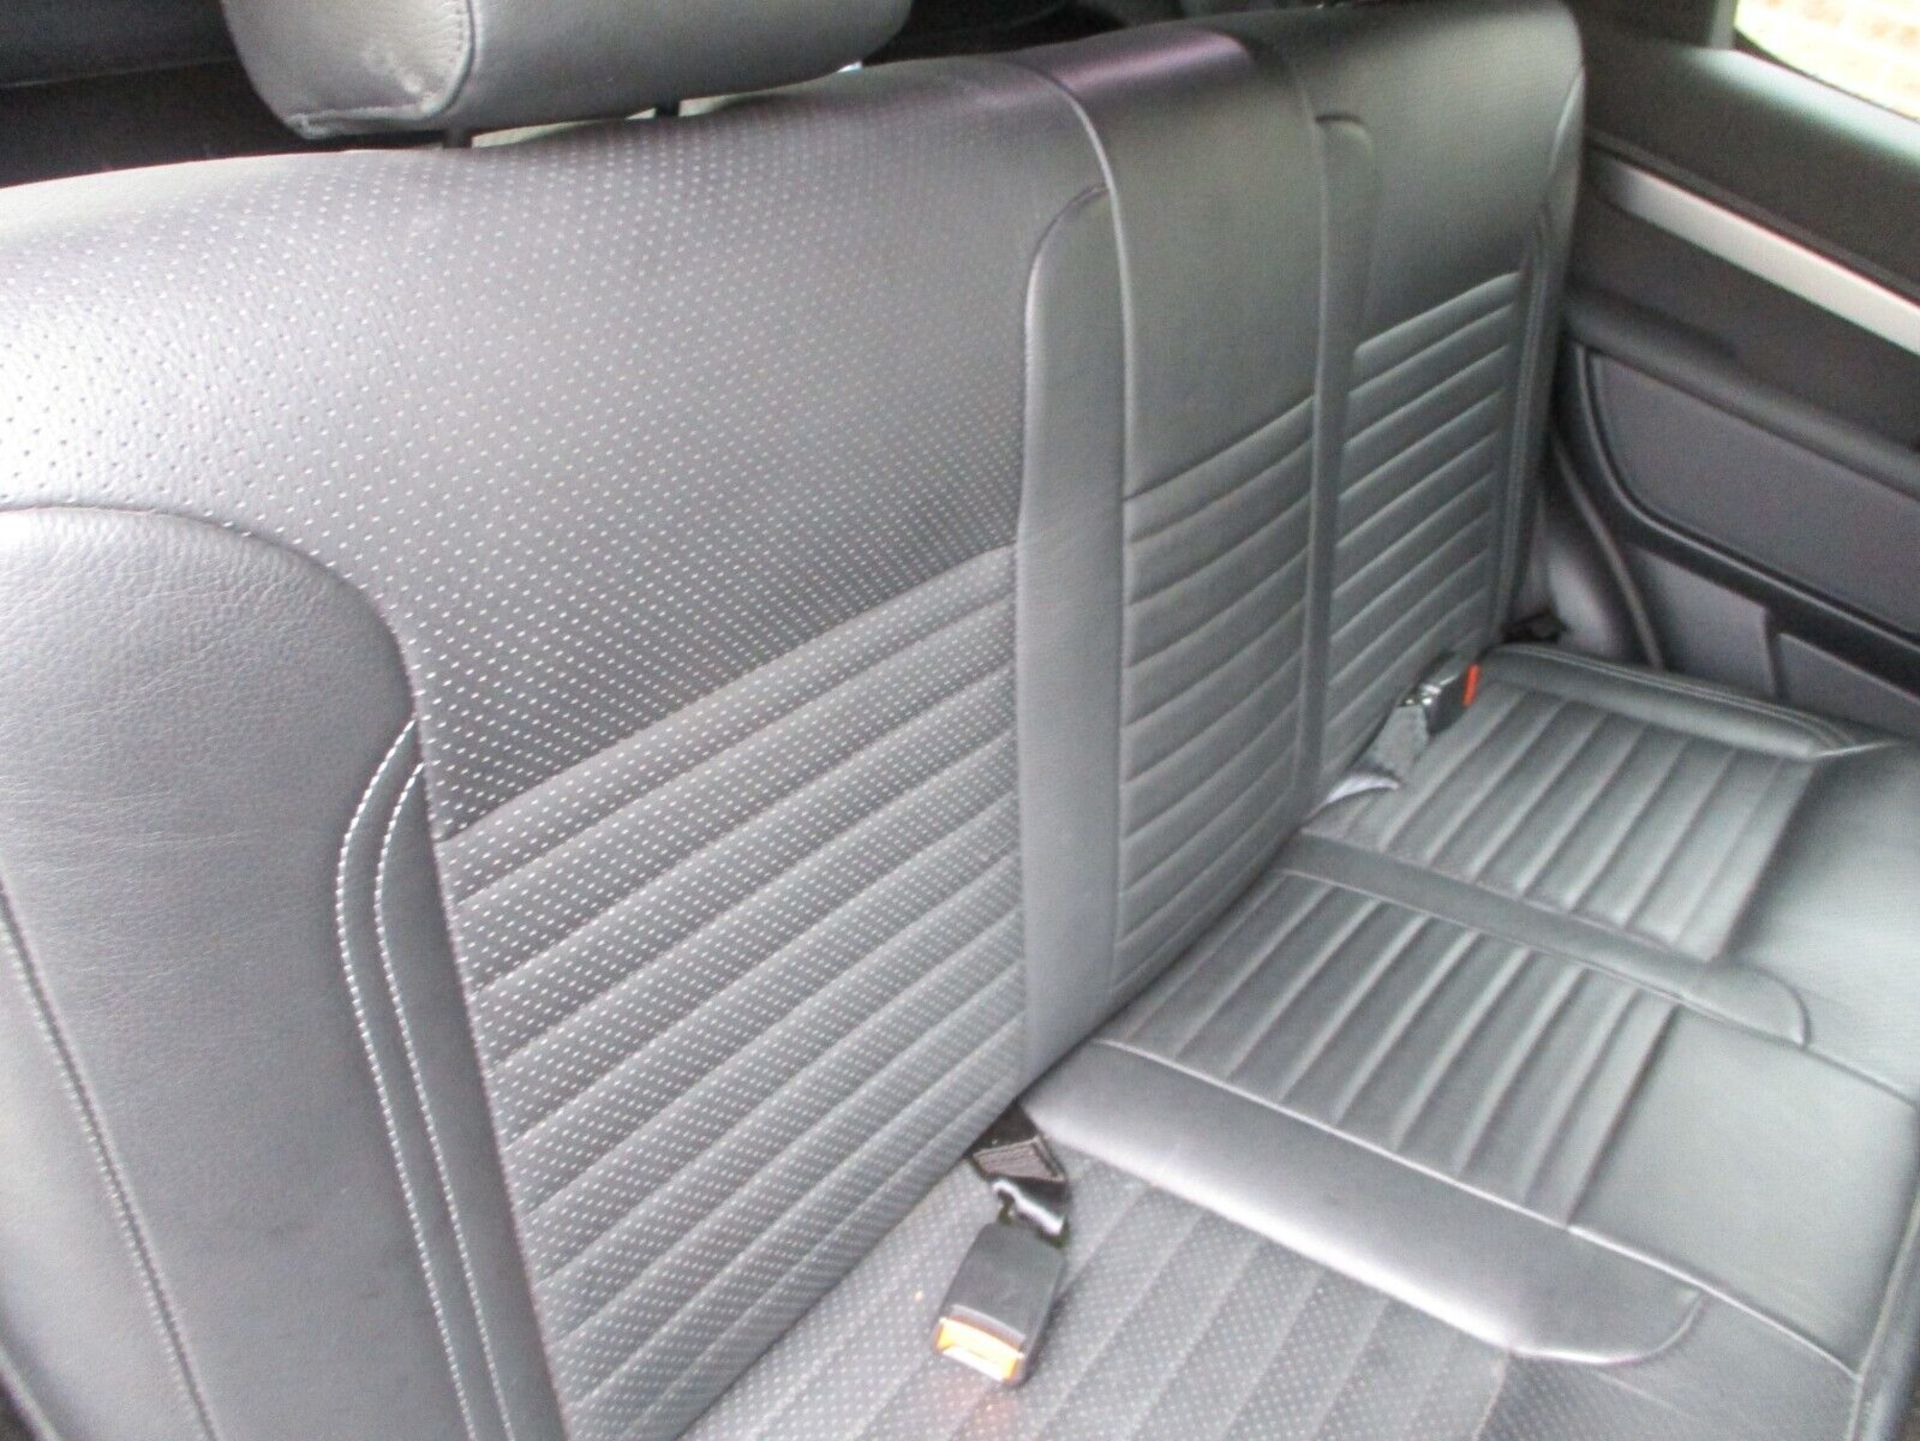 2022 LAND ROVER DISCOVERY R DYNAMIC HSE - RARE REAR SEAT CONVERSION - IMMACULATE CONDITION! - Image 12 of 18